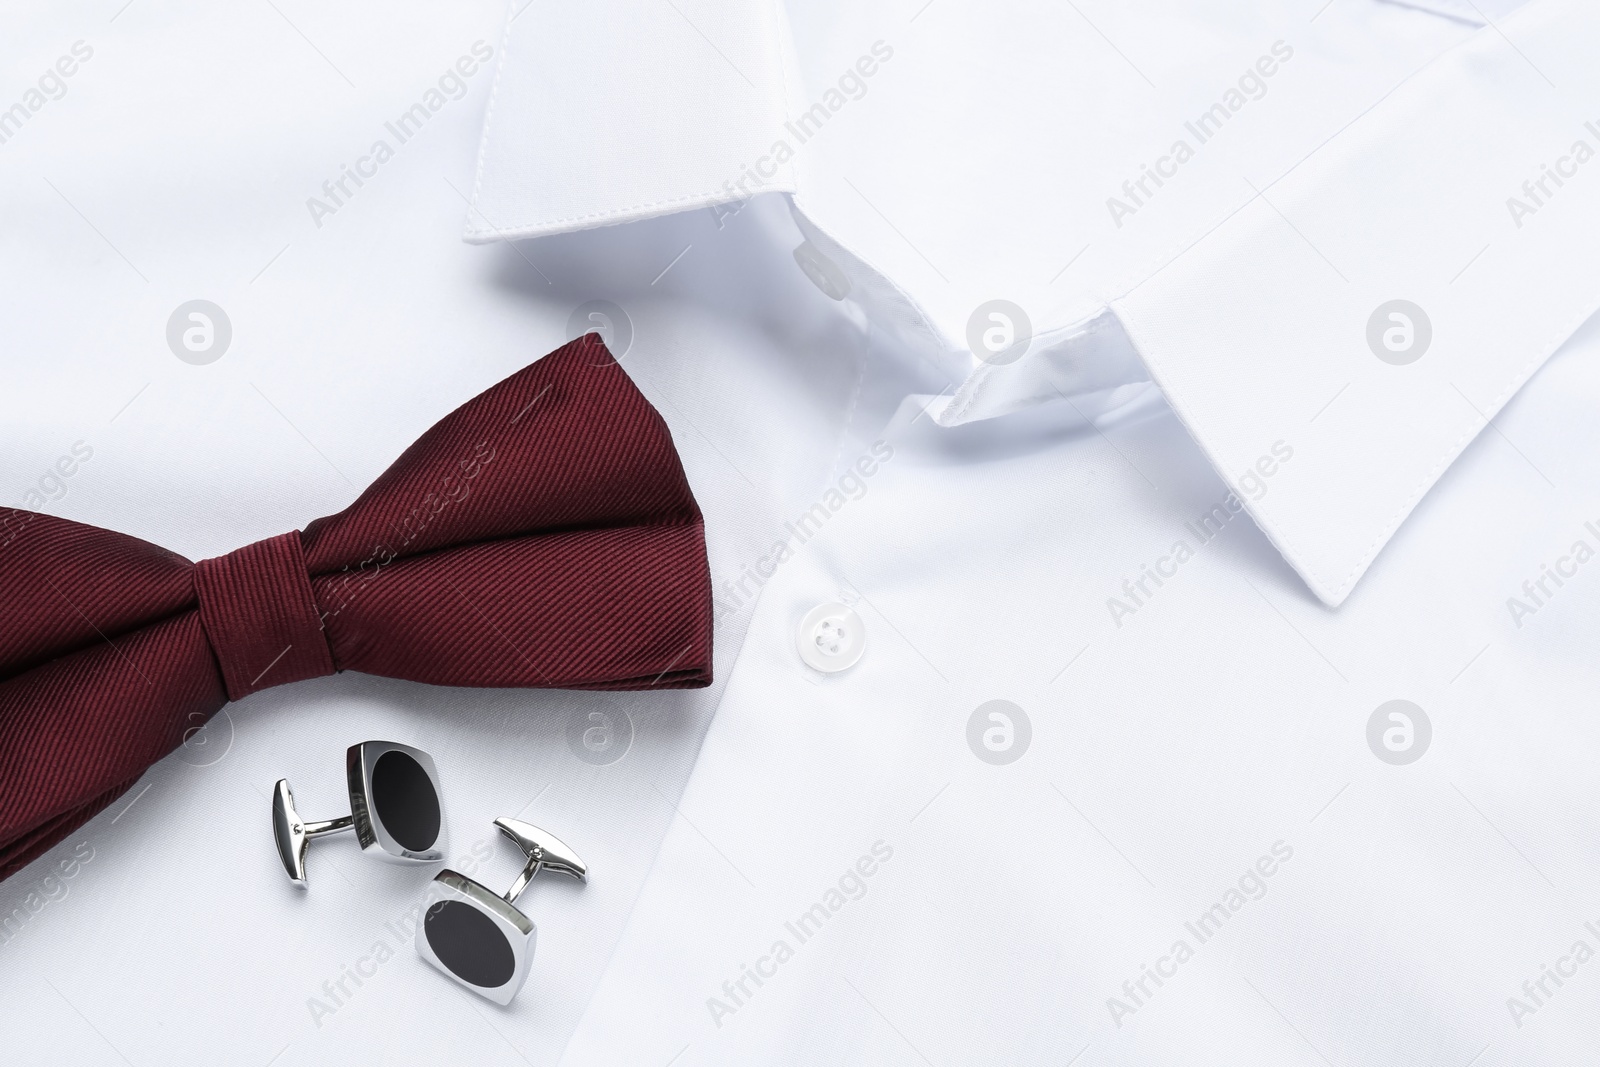 Photo of Stylish burgundy bow tie and cufflinks on white shirt, top view